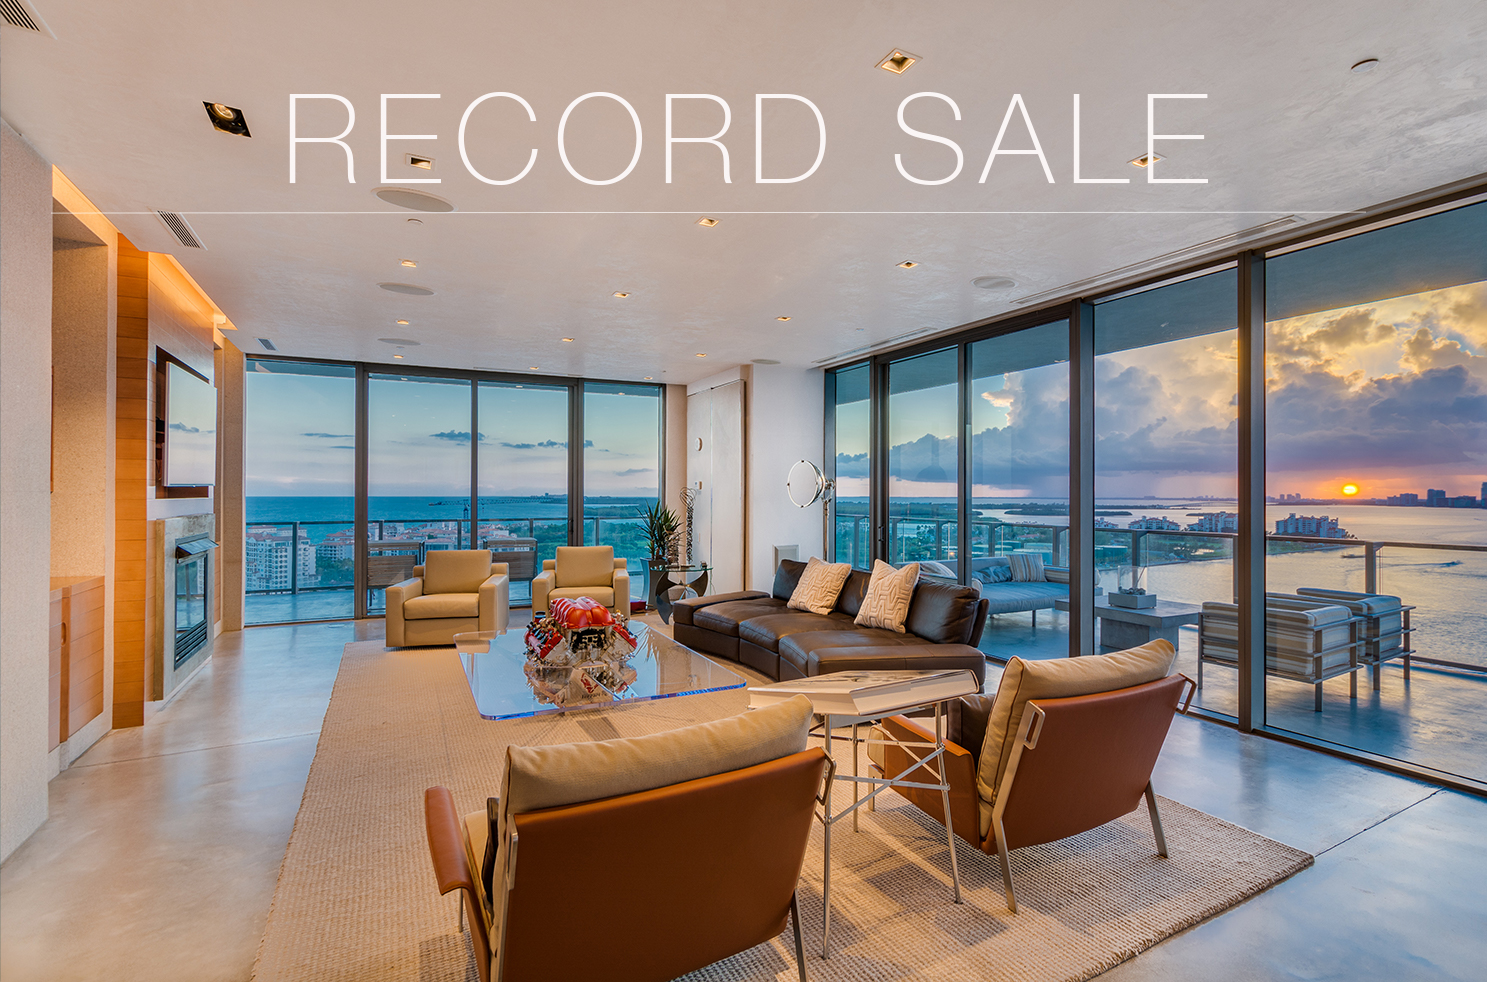 Record-Breaking Sale for Apogee South Beach | Penthouse 2104  Sold at $14,800,000 by Miami Top Producer Nelson Gonzalez